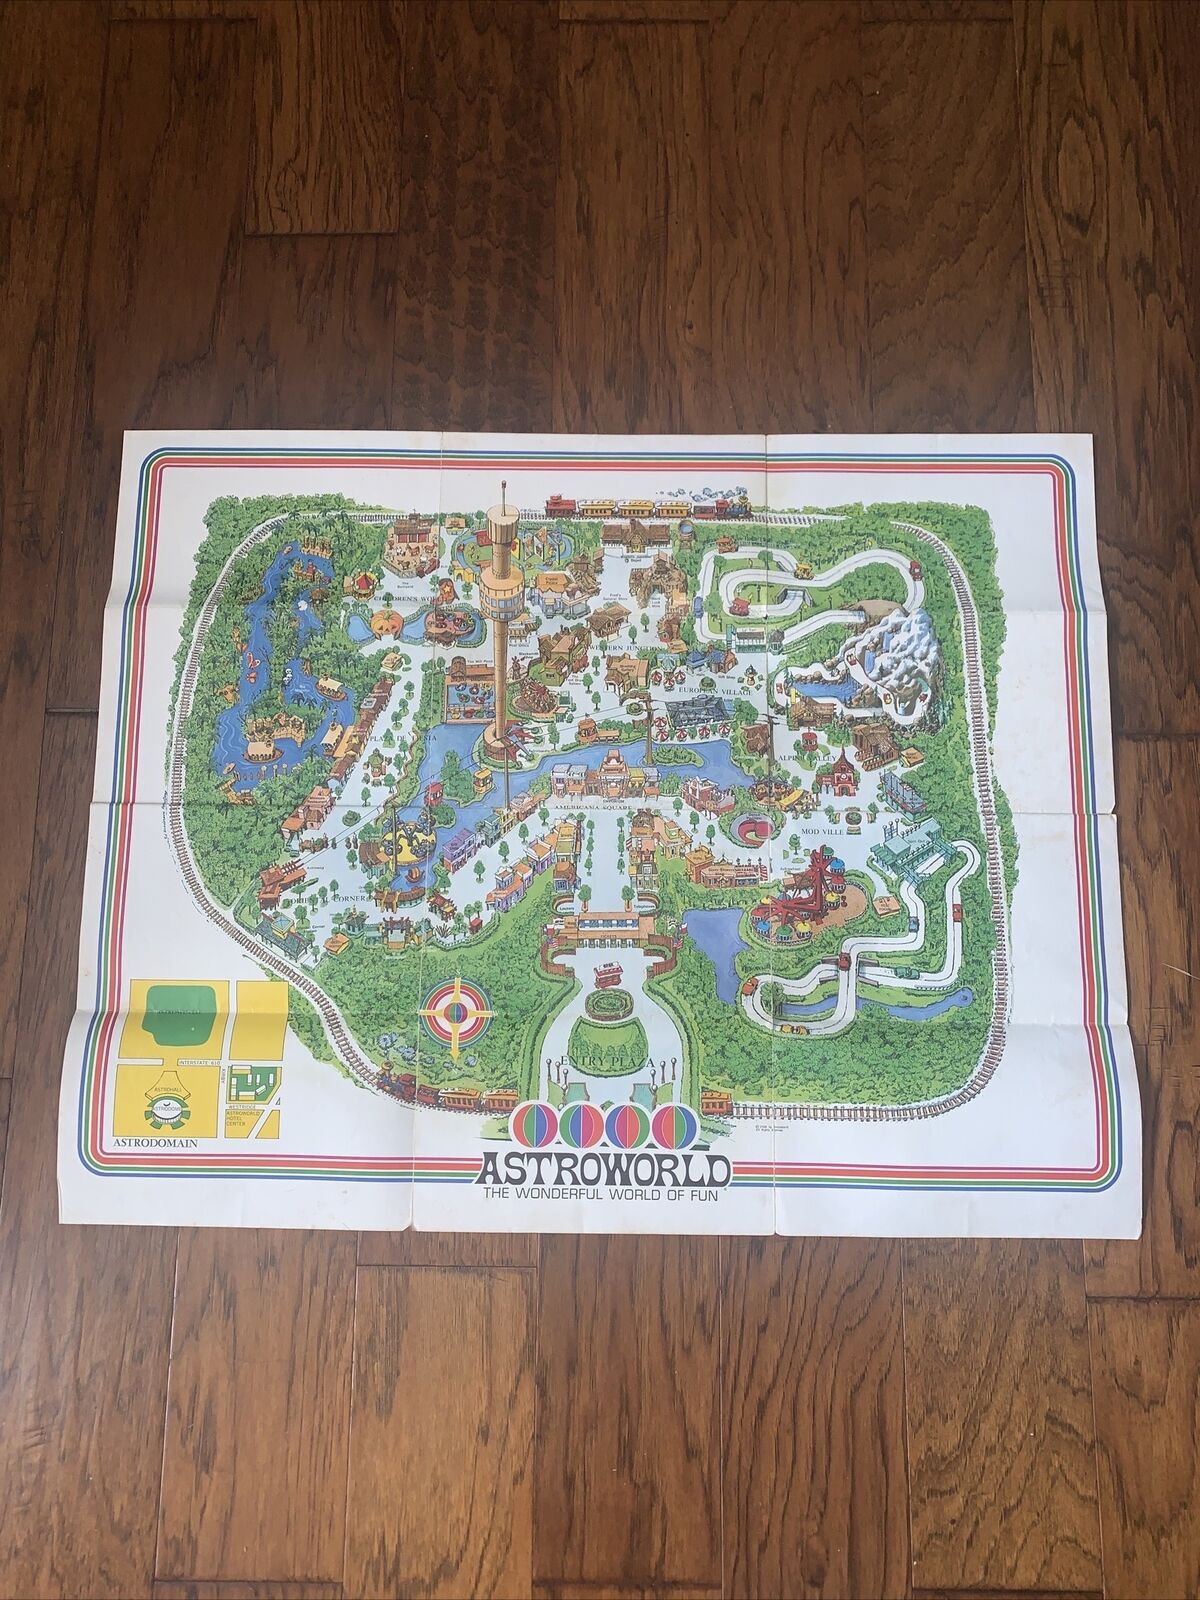 Astroworld Map Original Six Flags From OPENING YEAR (1968) RARE